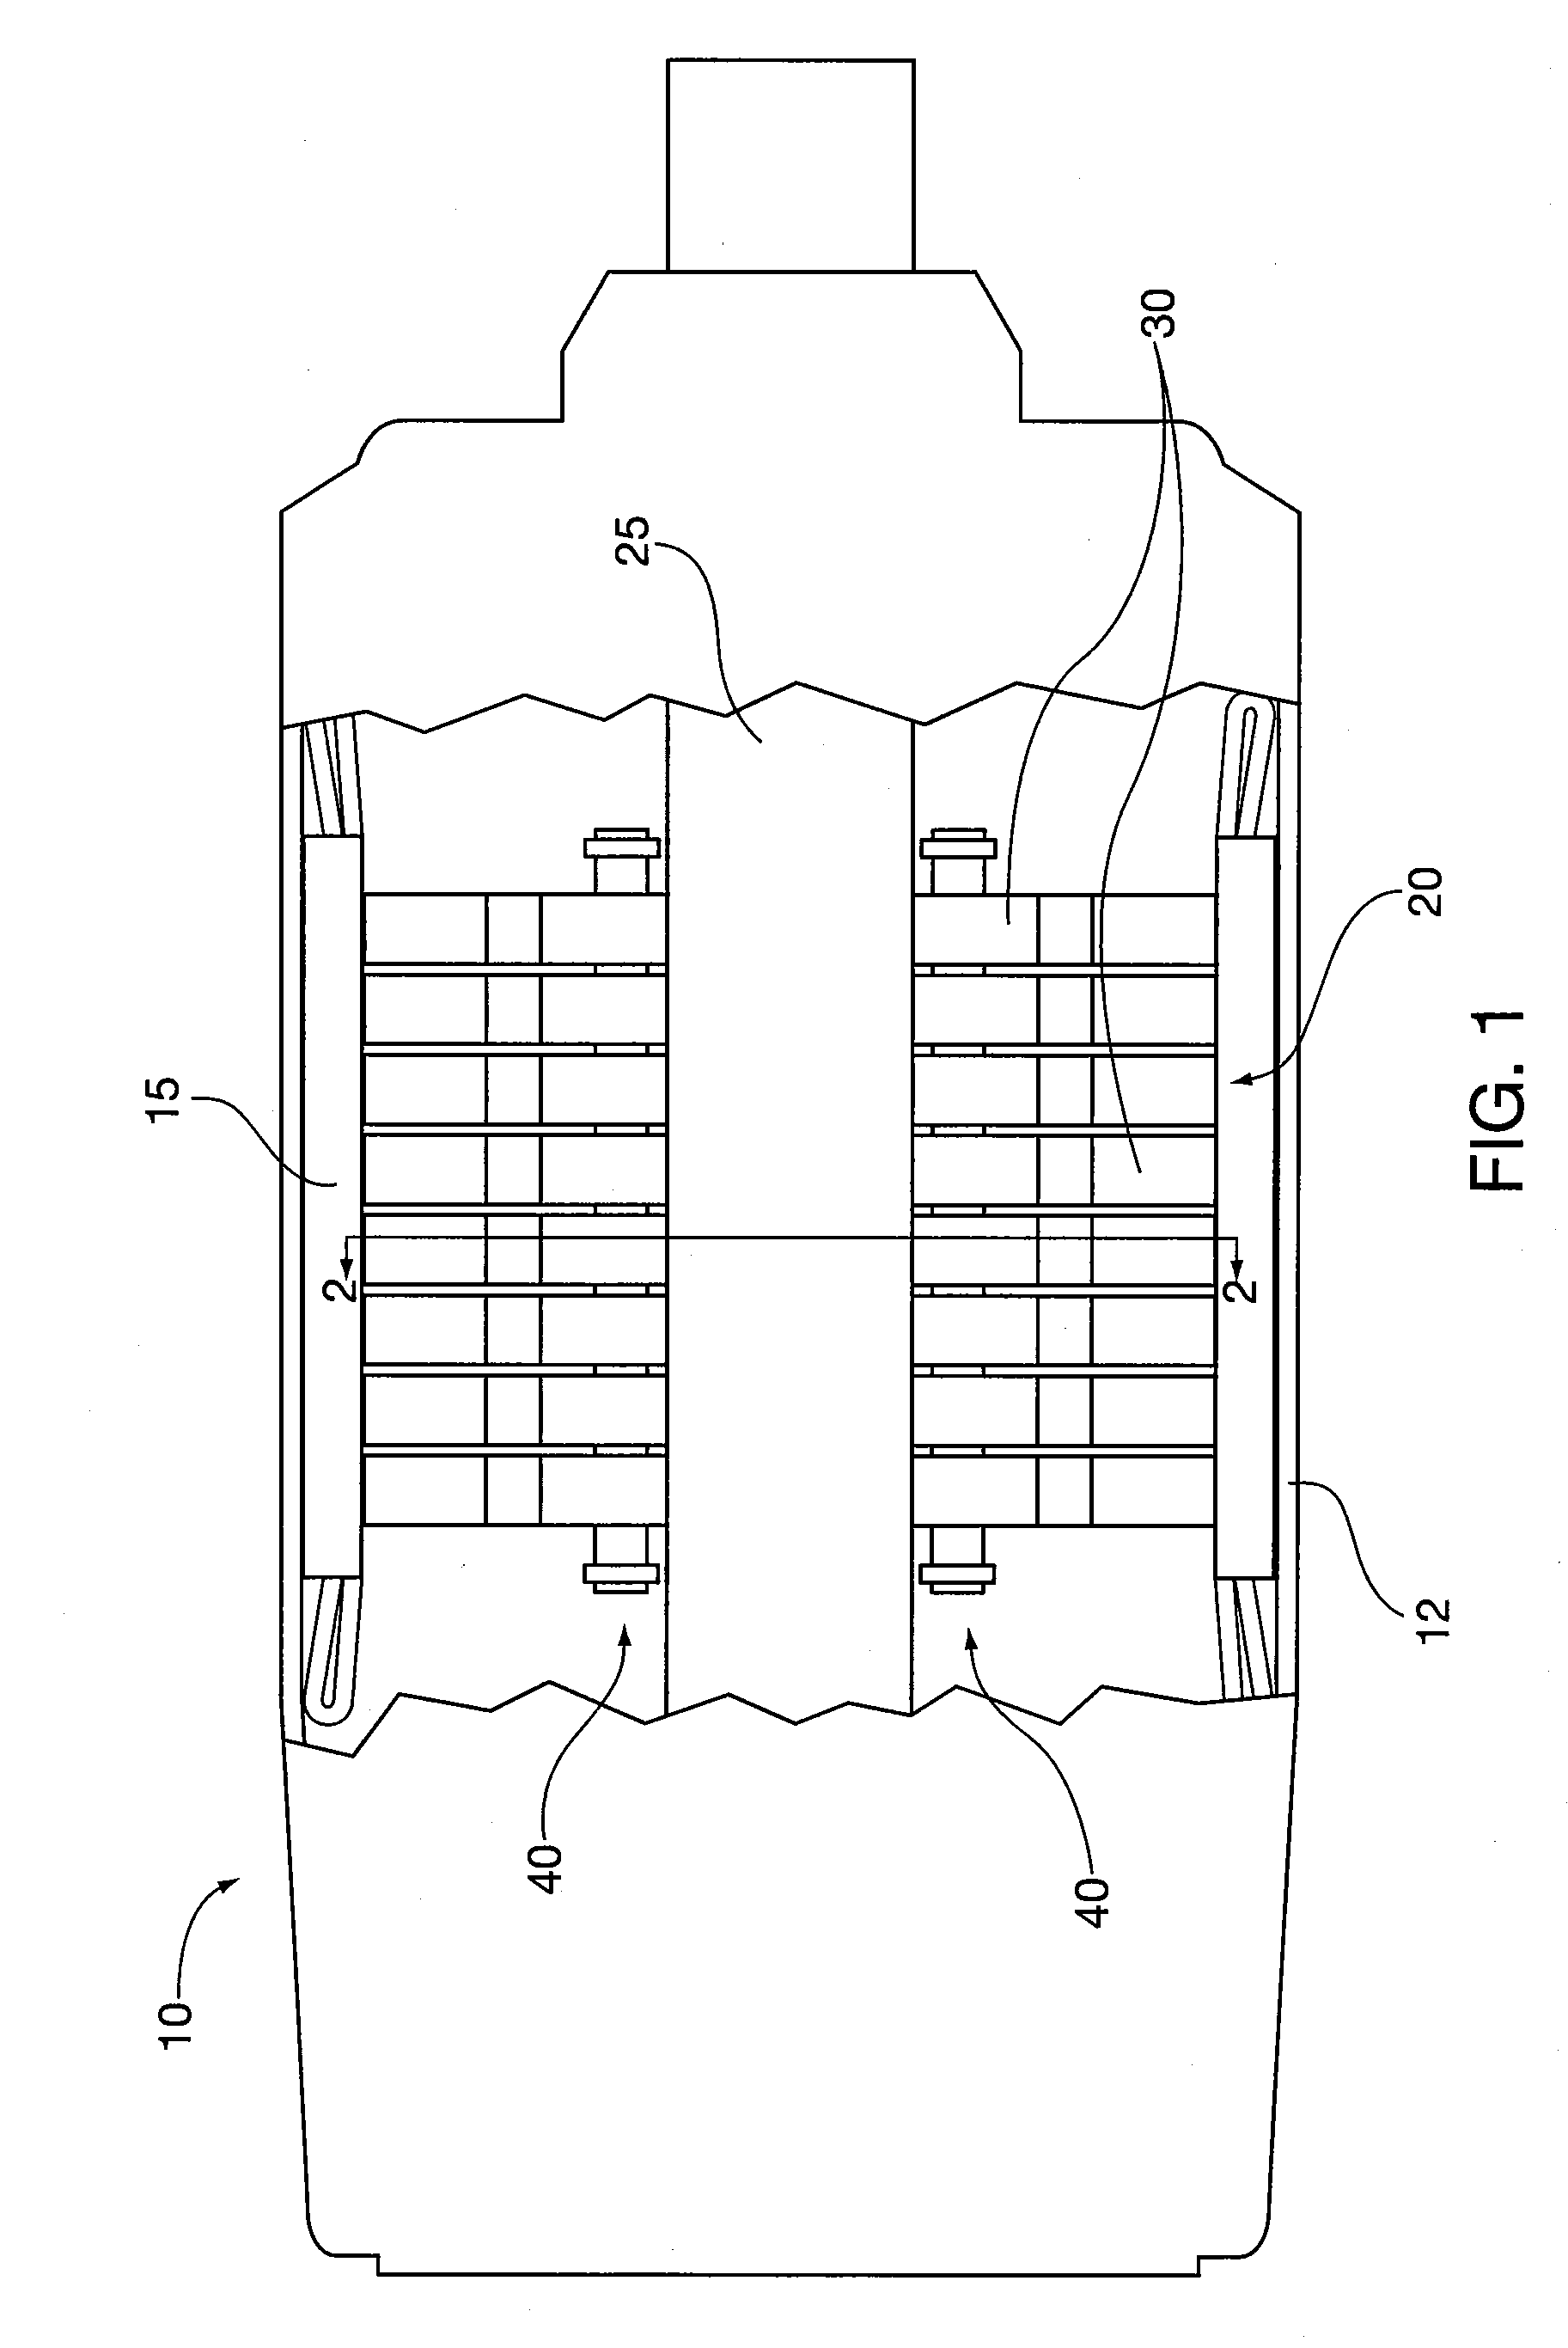 Method of Tuning Bending and Torsion Stiffness of Ducted Rotor Core of An Induction Motor